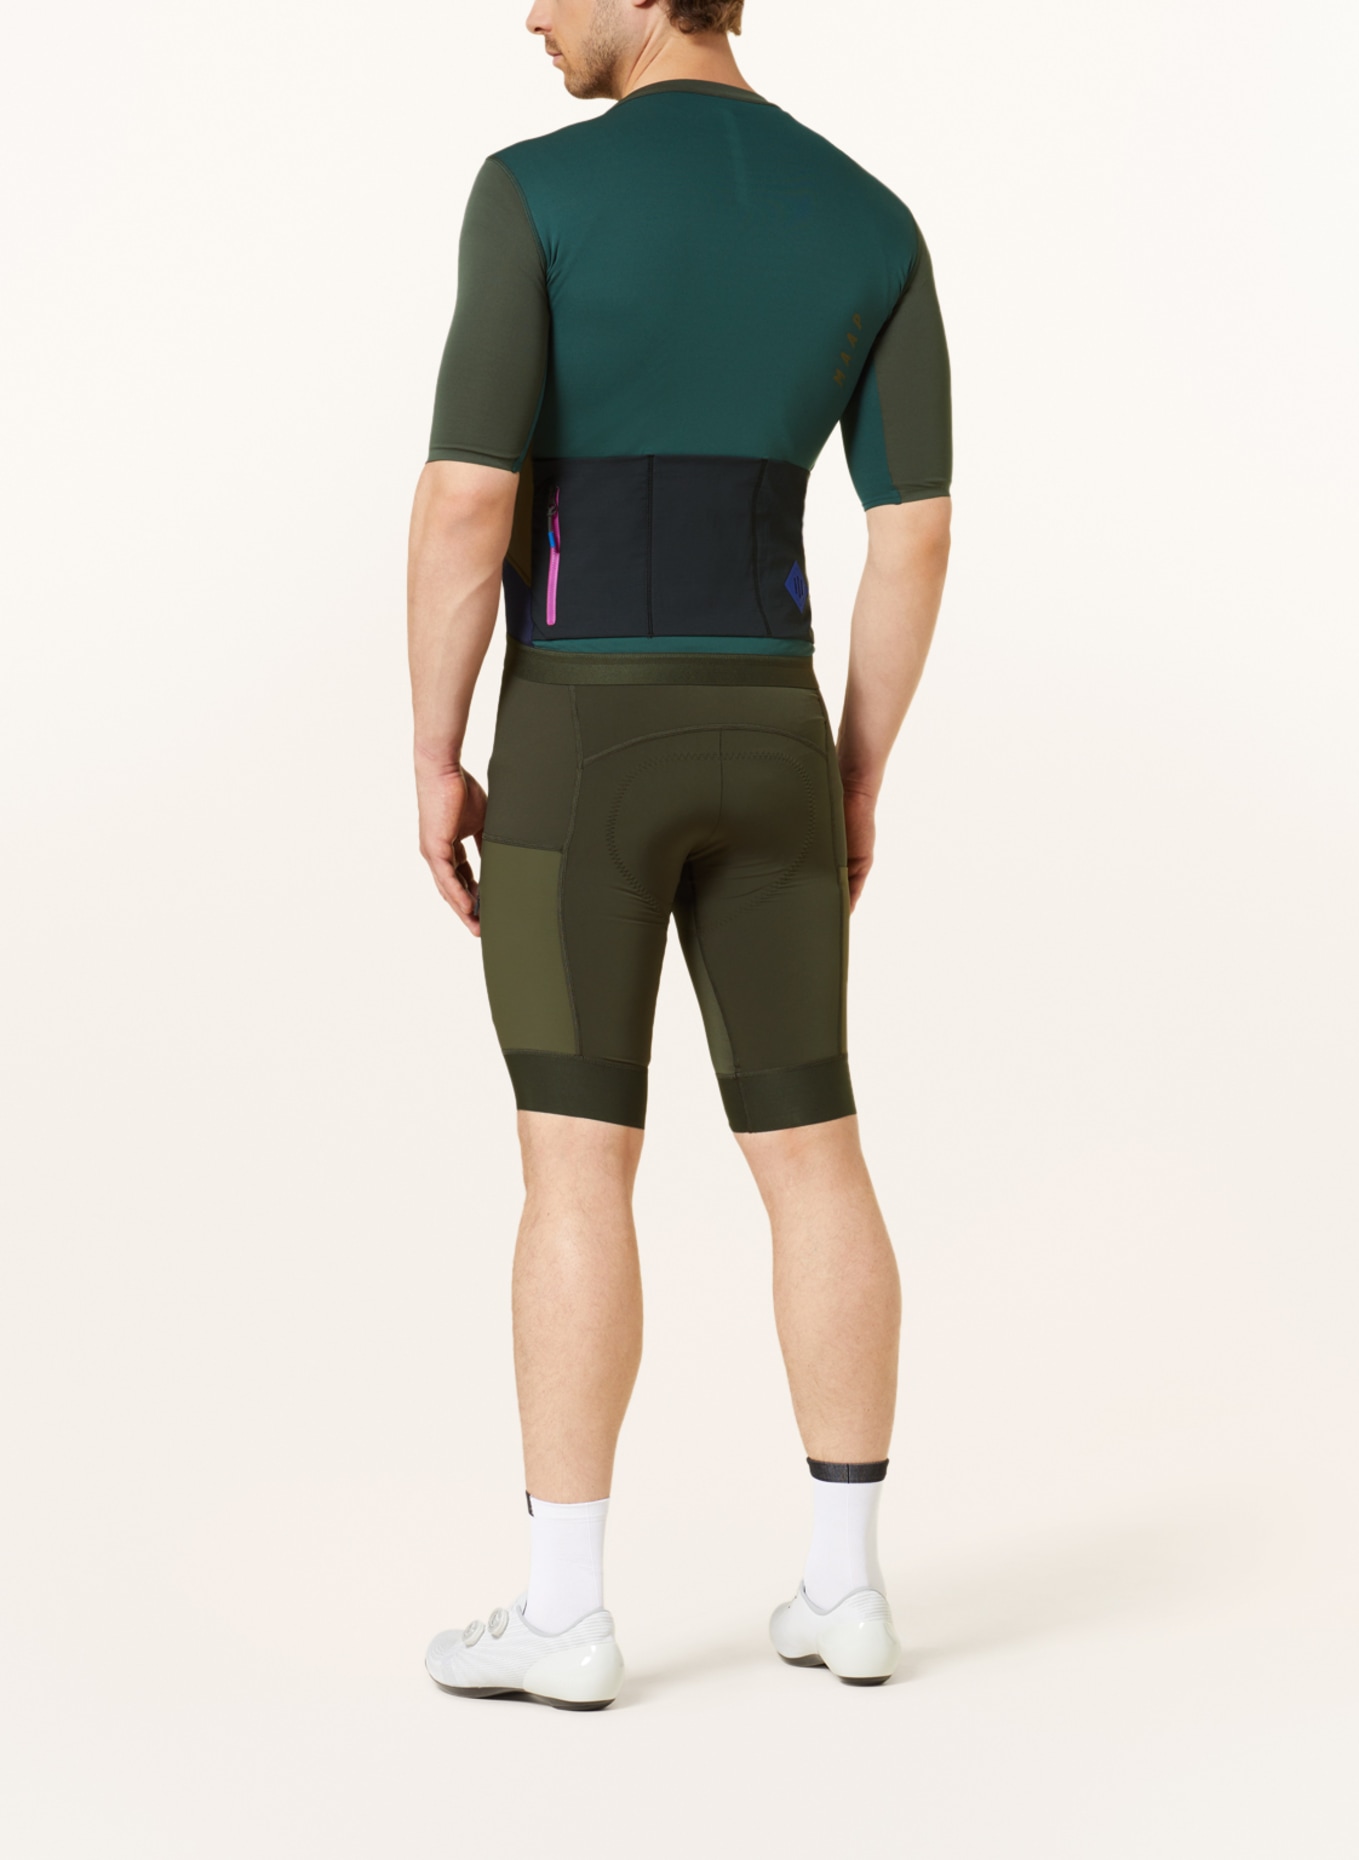 MAAP Cycling jersey ALT_ROAD, Color: OLIVE (Image 3)